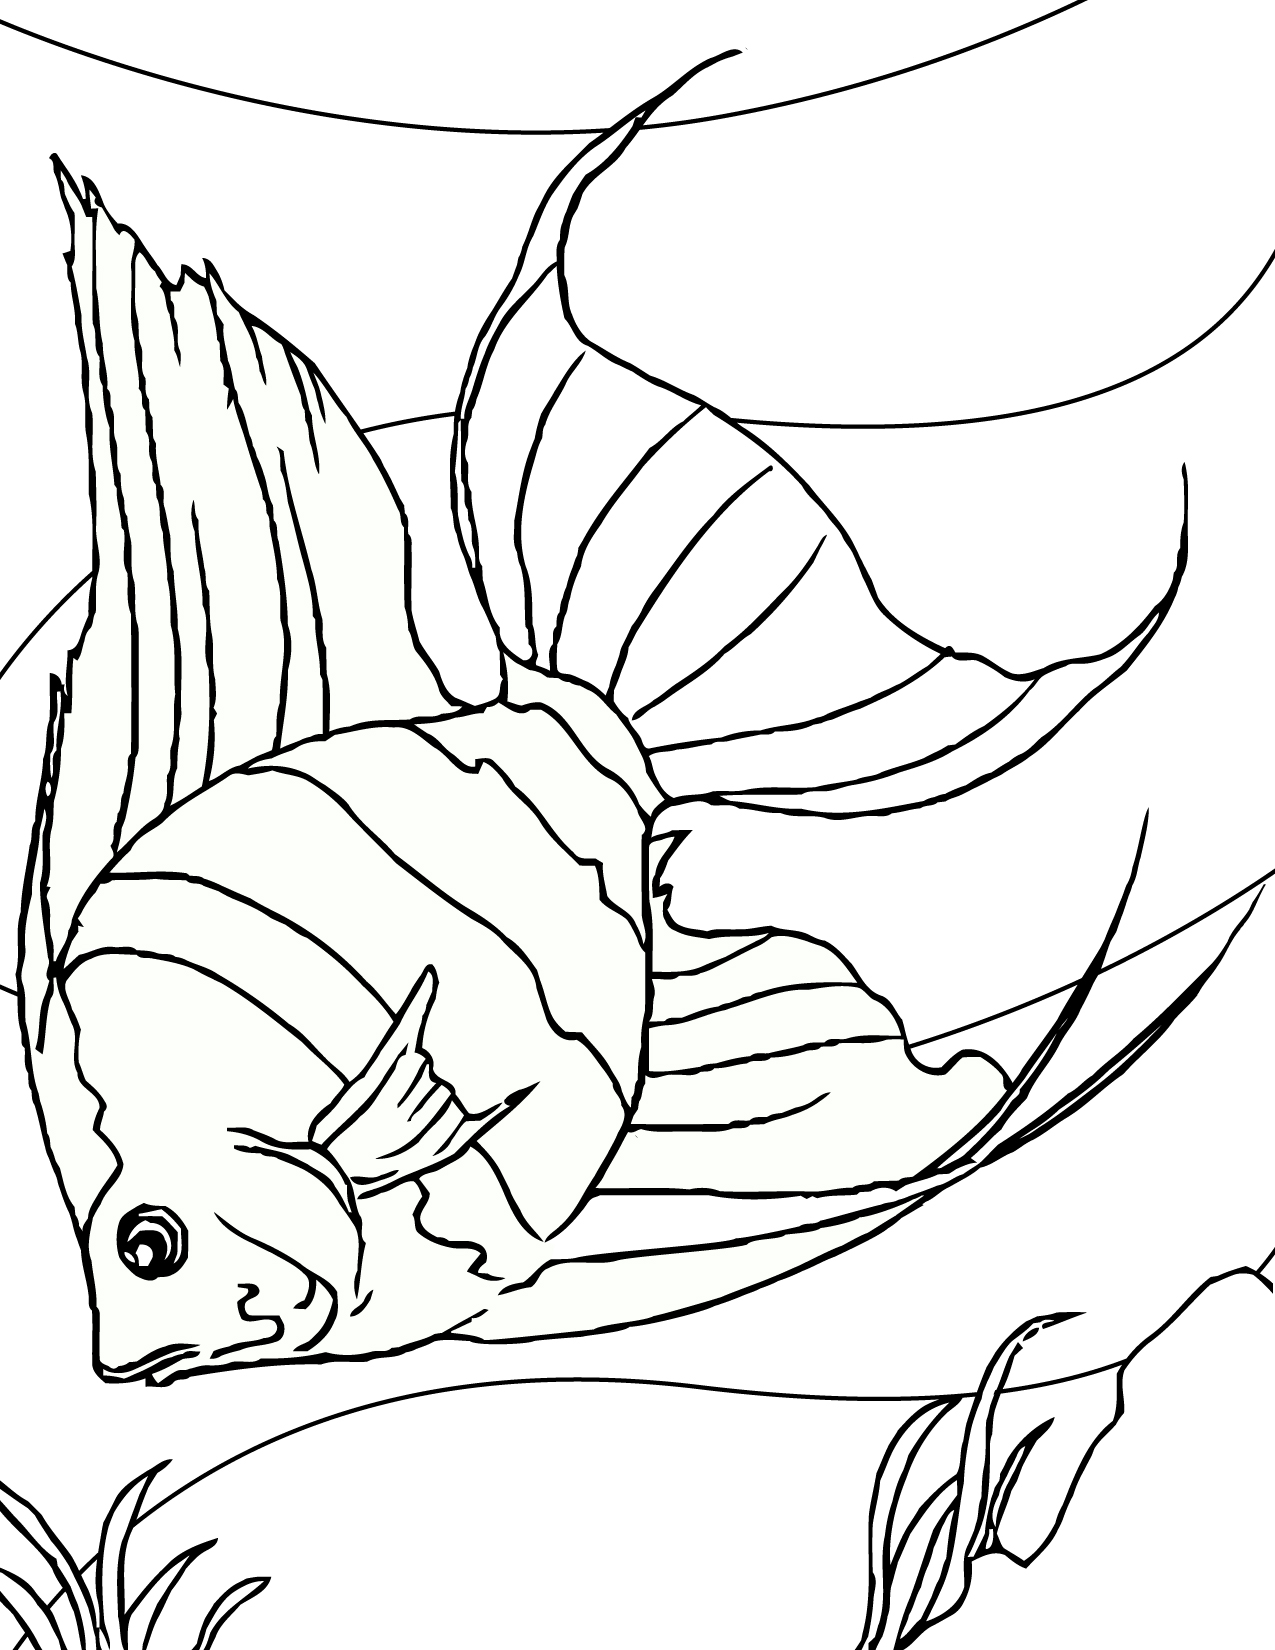 Free Printable Fish Coloring Pages For Kids BEDECOR Free Coloring Picture wallpaper give a chance to color on the wall without getting in trouble! Fill the walls of your home or office with stress-relieving [bedroomdecorz.blogspot.com]